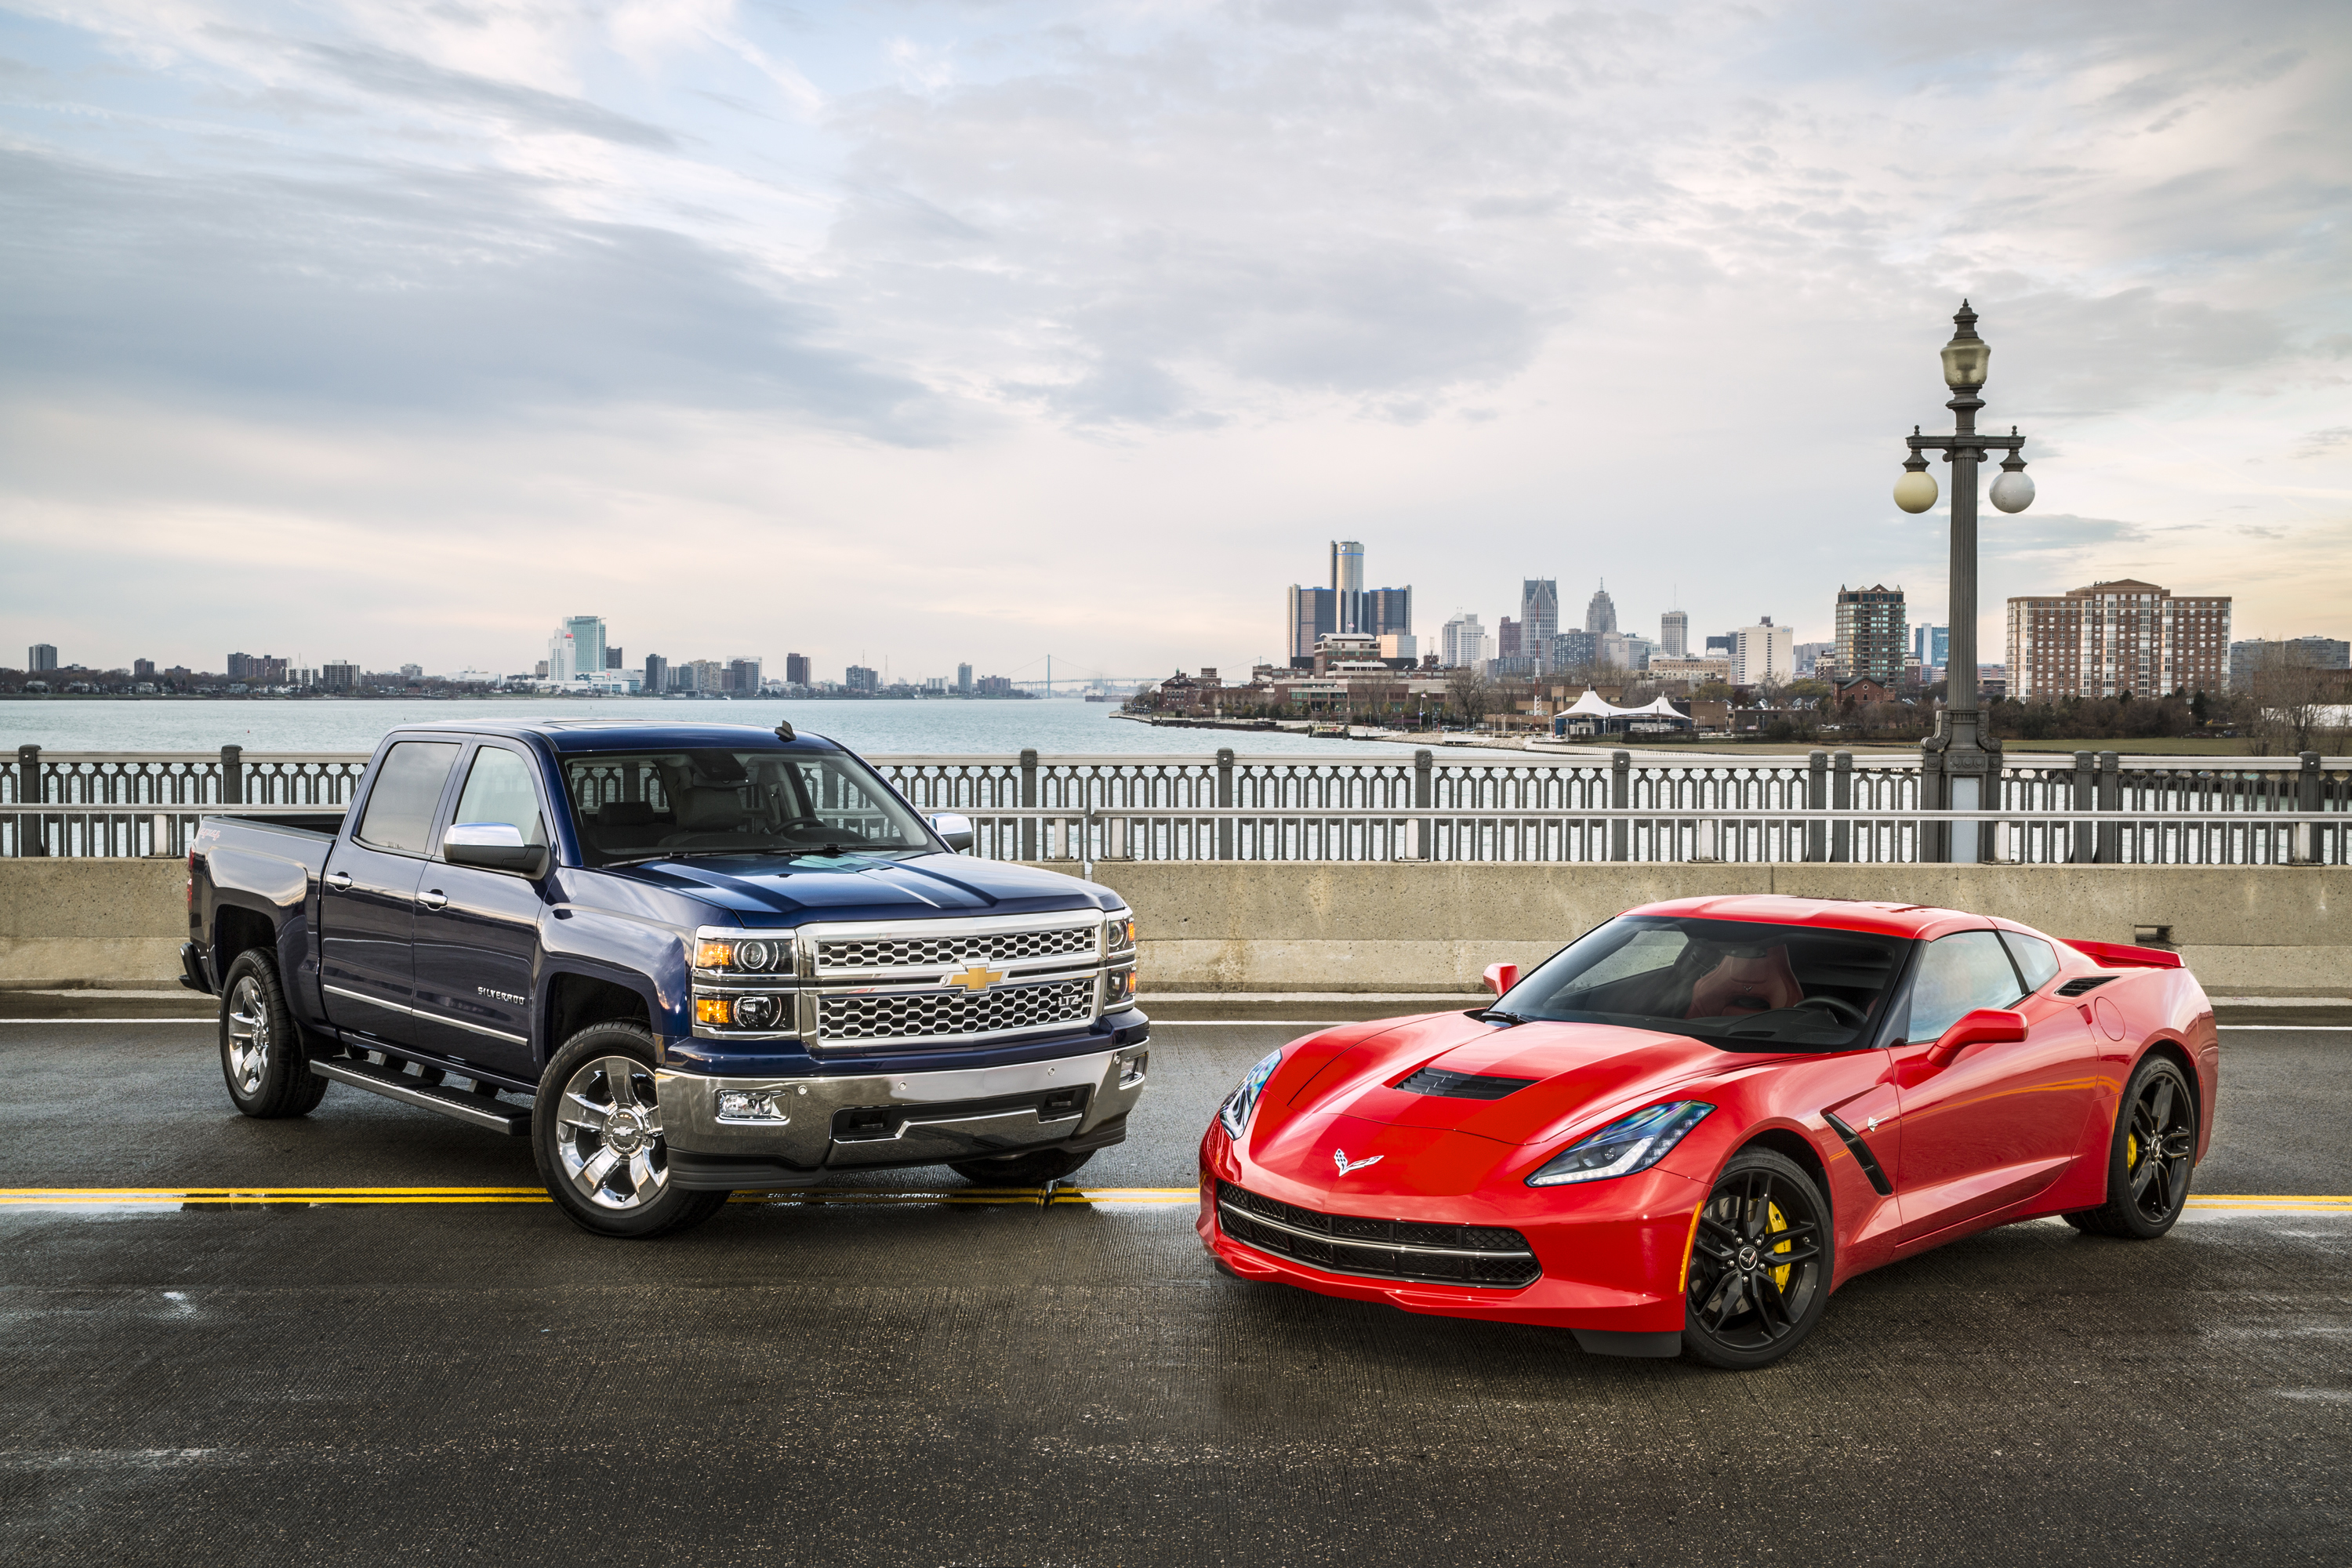 2014 North American Car and Truck of the Year